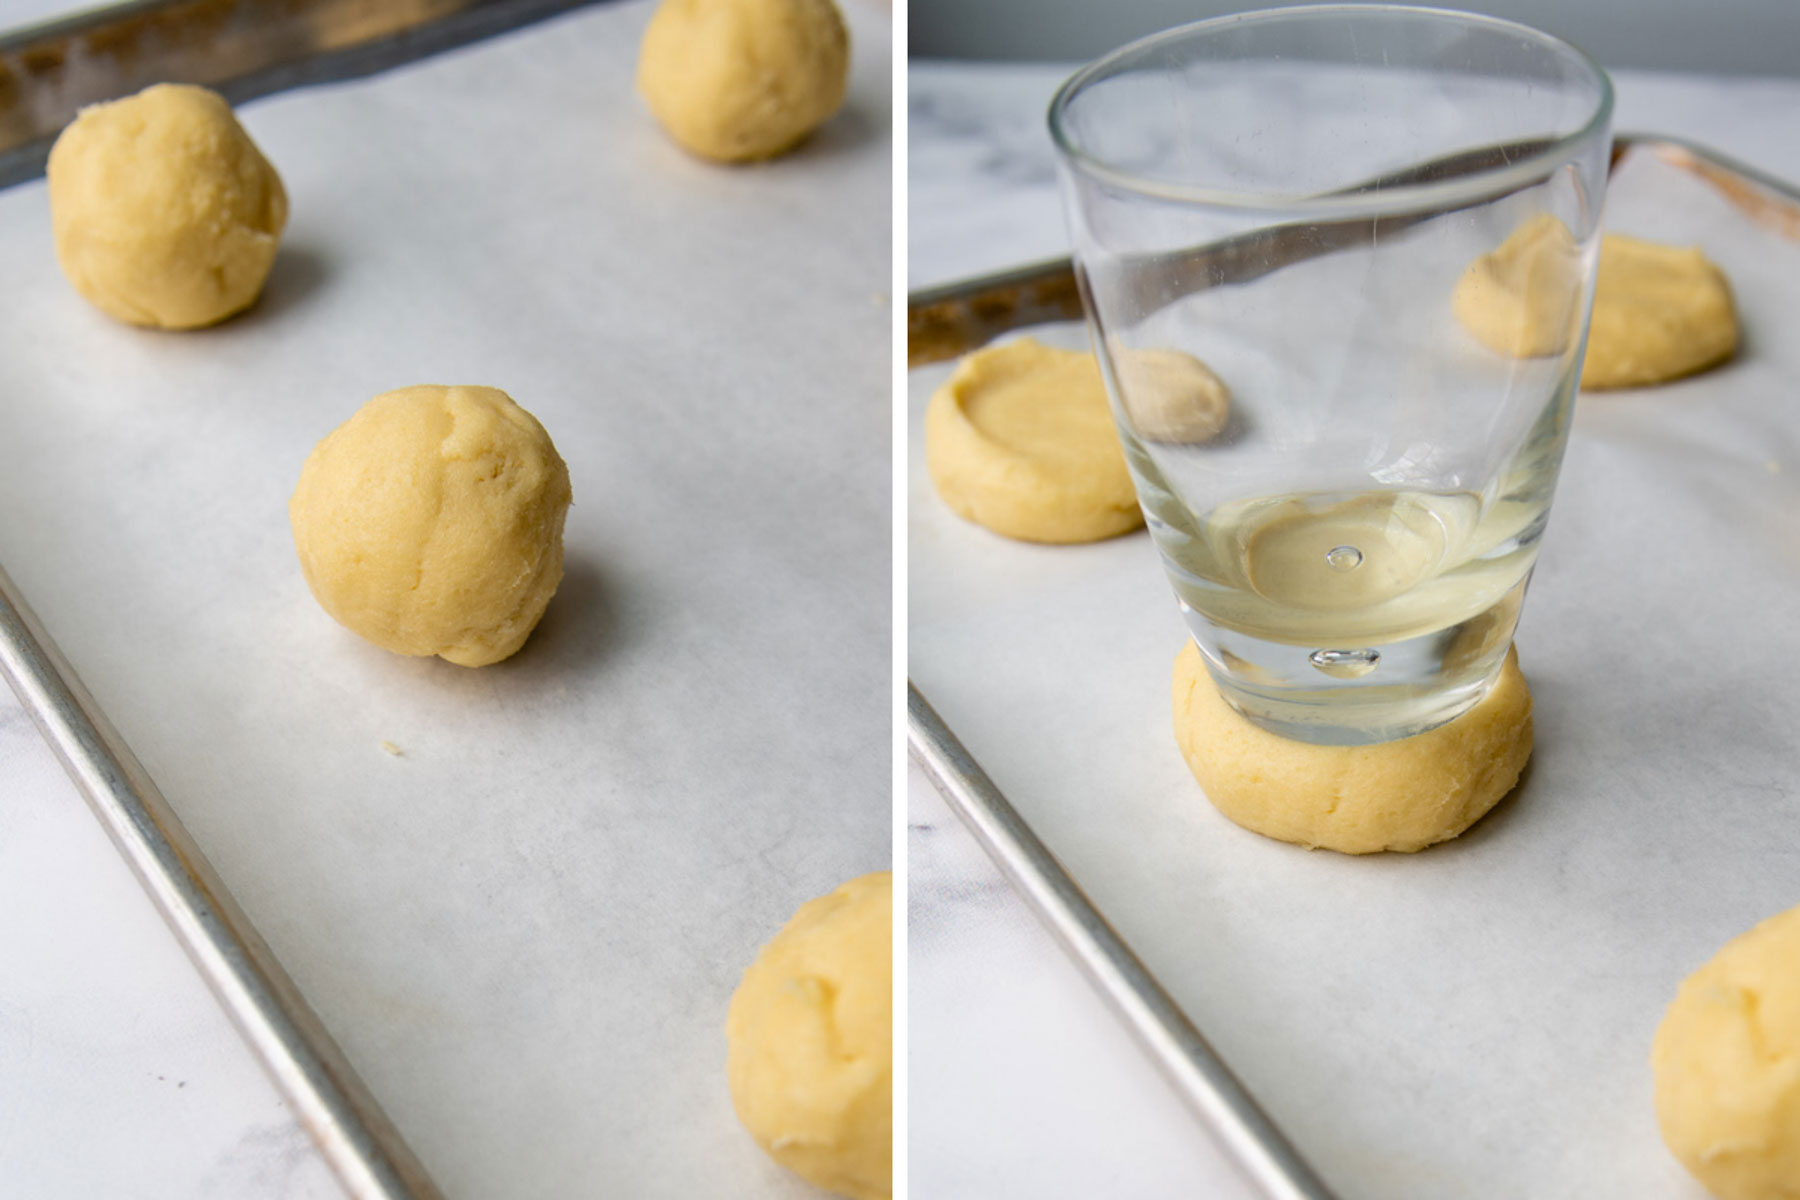 images showing how to shape and flatten the cookies.